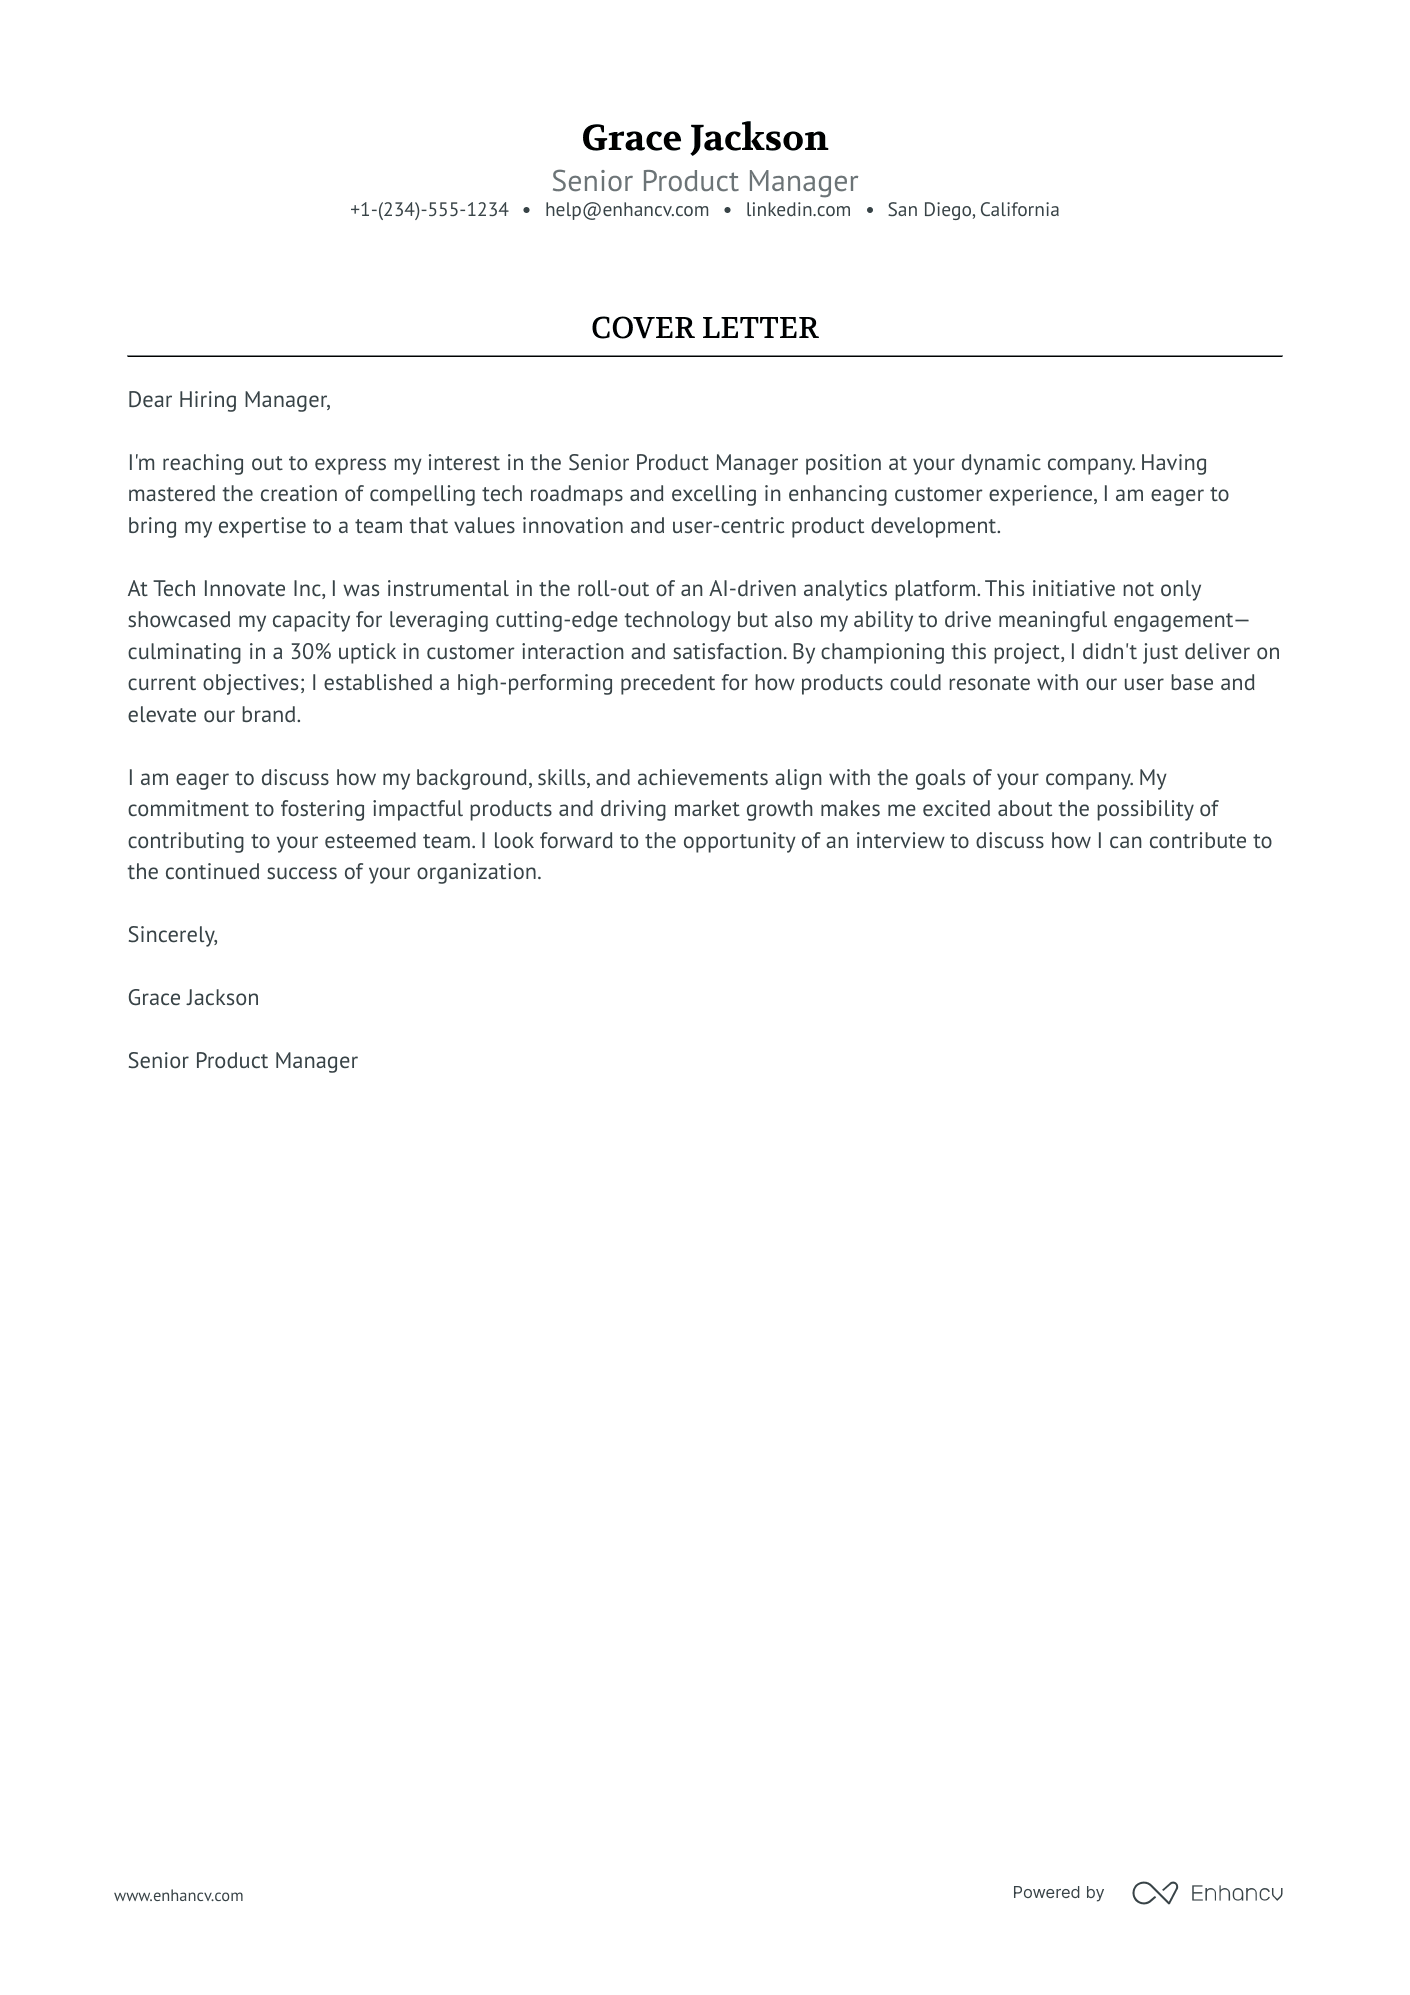 Group Product Manager cover letter